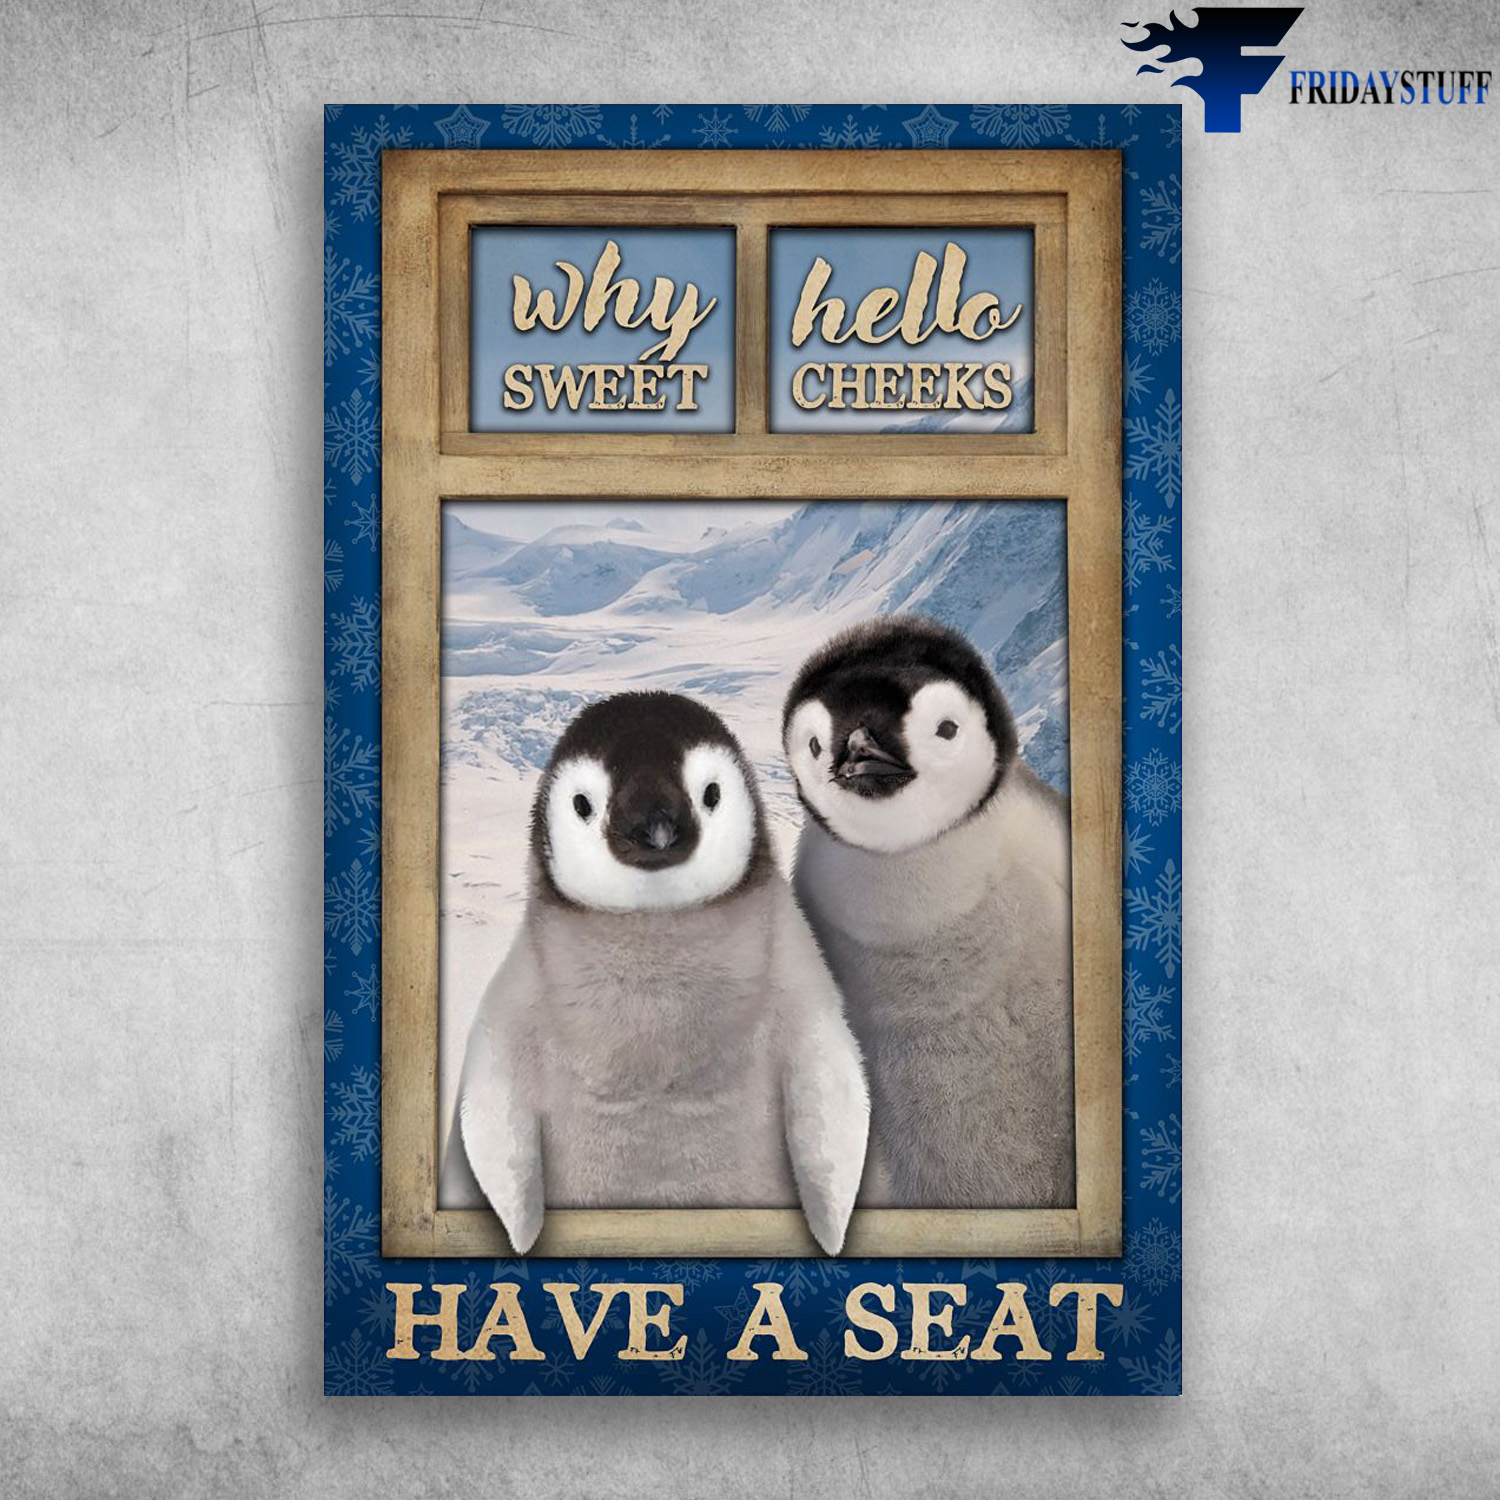 Cute Penguin Window - Why Sweet Hello, Have A Seat